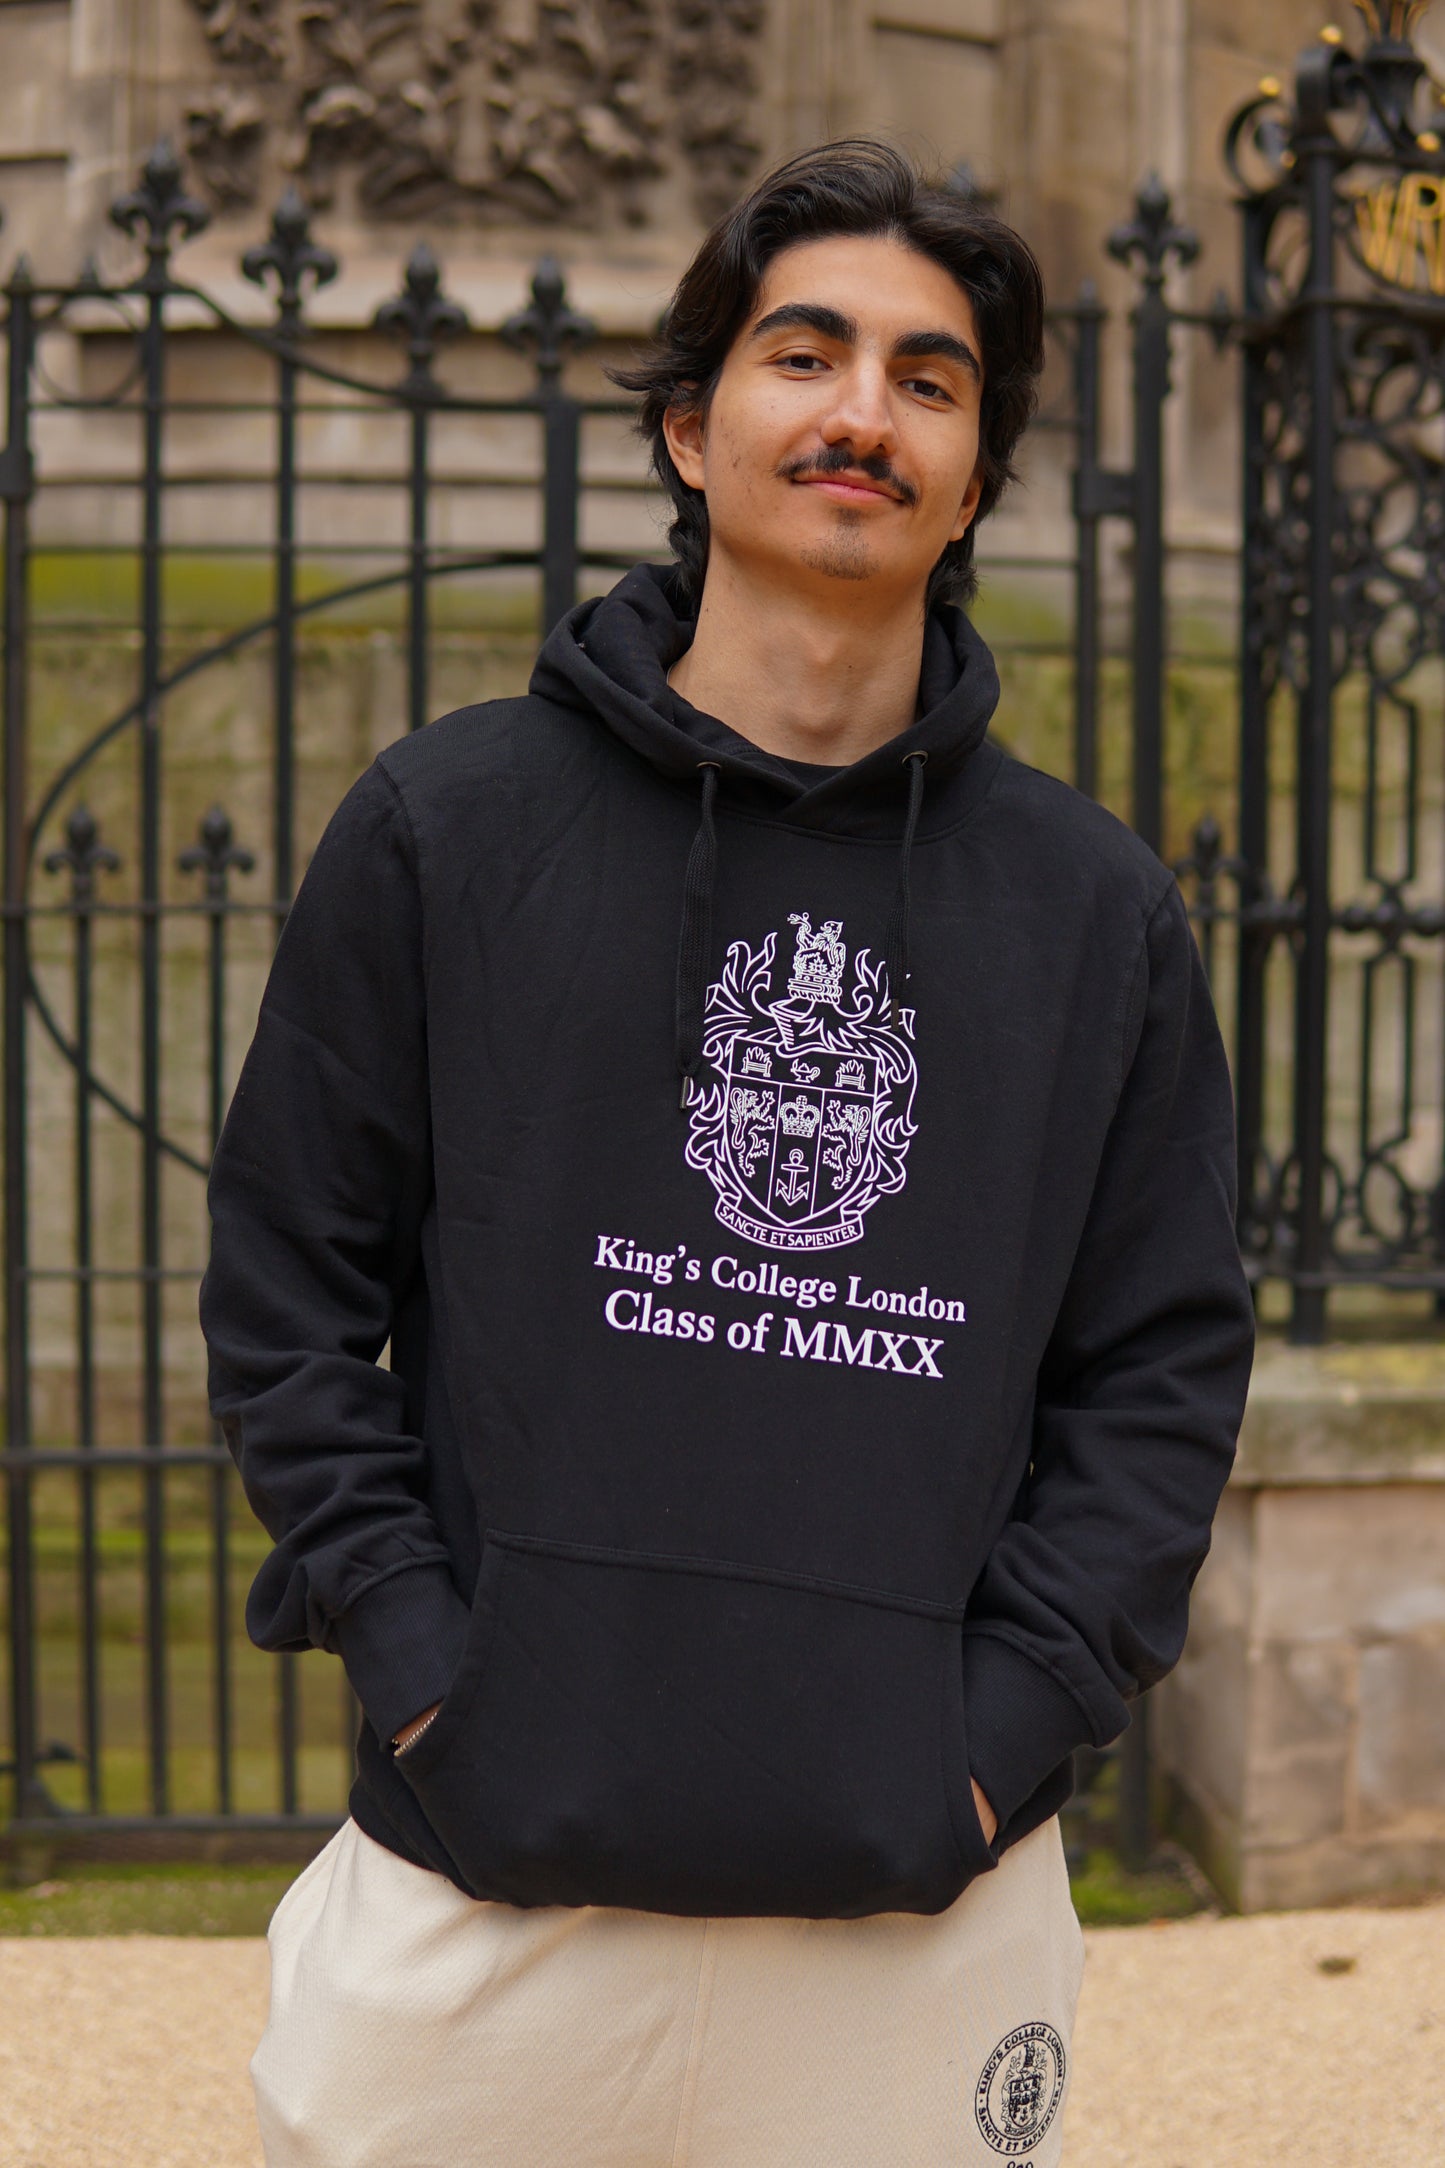 King's College London Class of 2020 Graduation Hoodie in Black